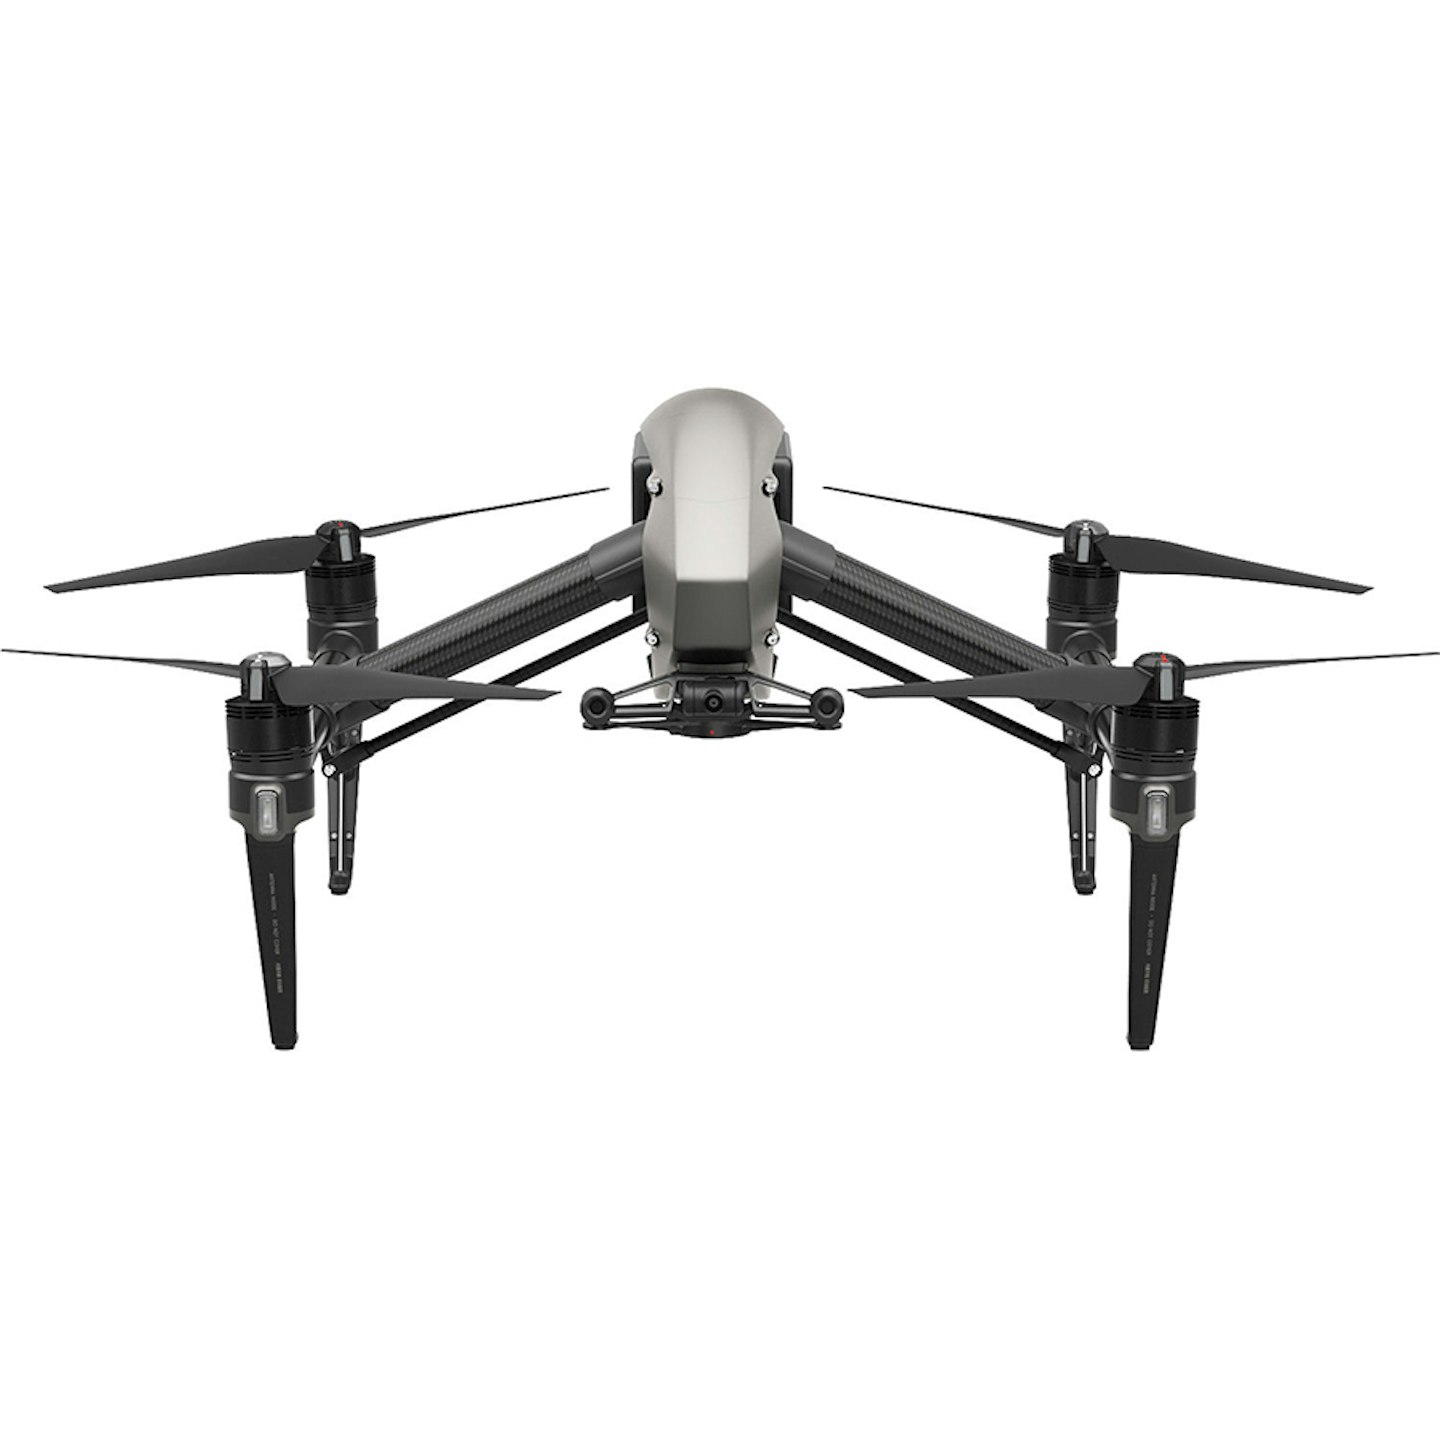 DJI Inspire 2 with Zenmuse X5S camera and gimbal